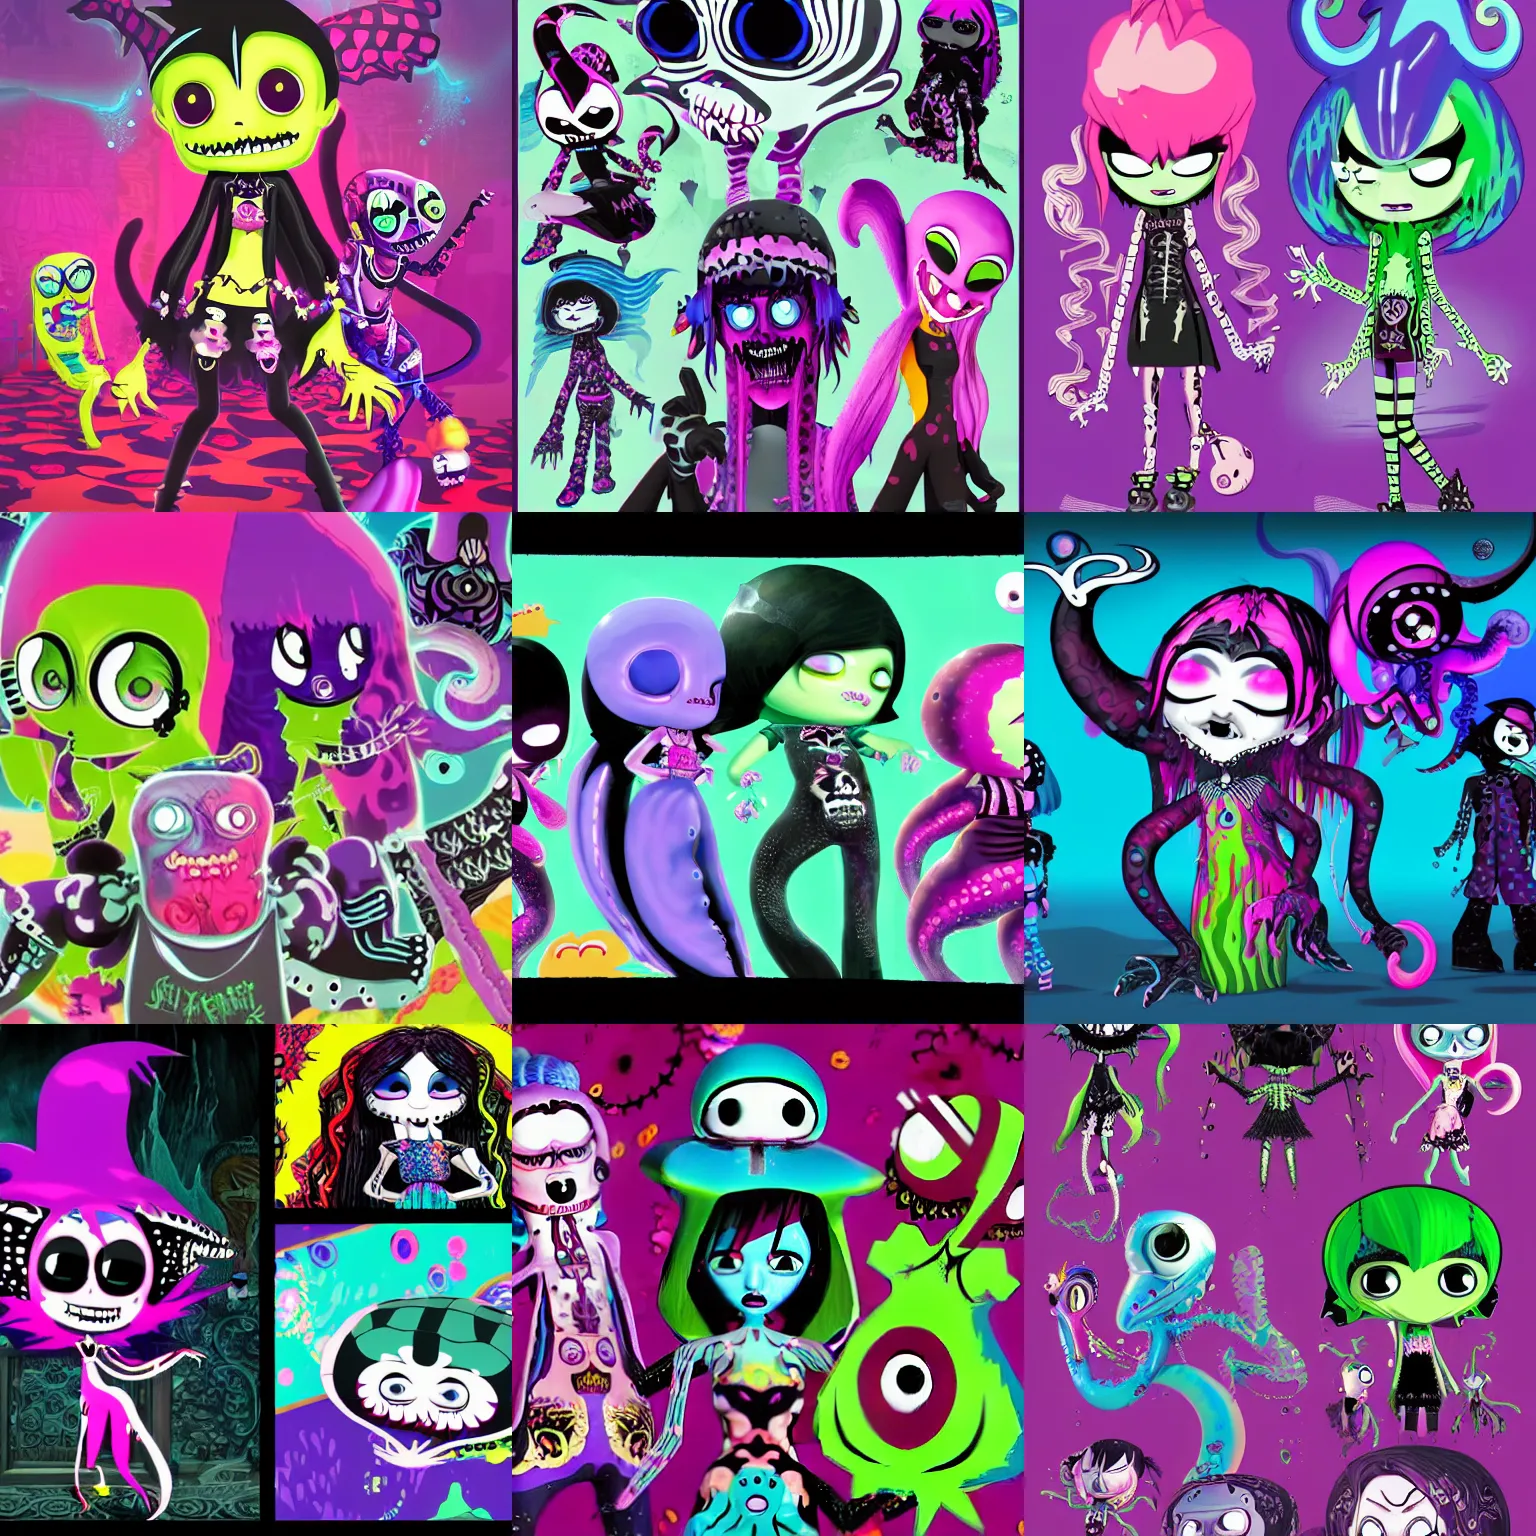 Prompt: CGI lisa frank gothic punk vampiric ghostly underwater vampiric anthropomorphic squid character designs of various shapes and sizes by genndy tartakovsky and ruby gloom by martin hsu and the creators of fret nice being overseen by Jamie Hewlett from gorillaz and tim shafer from doublefine for a splatoon game by nintendo